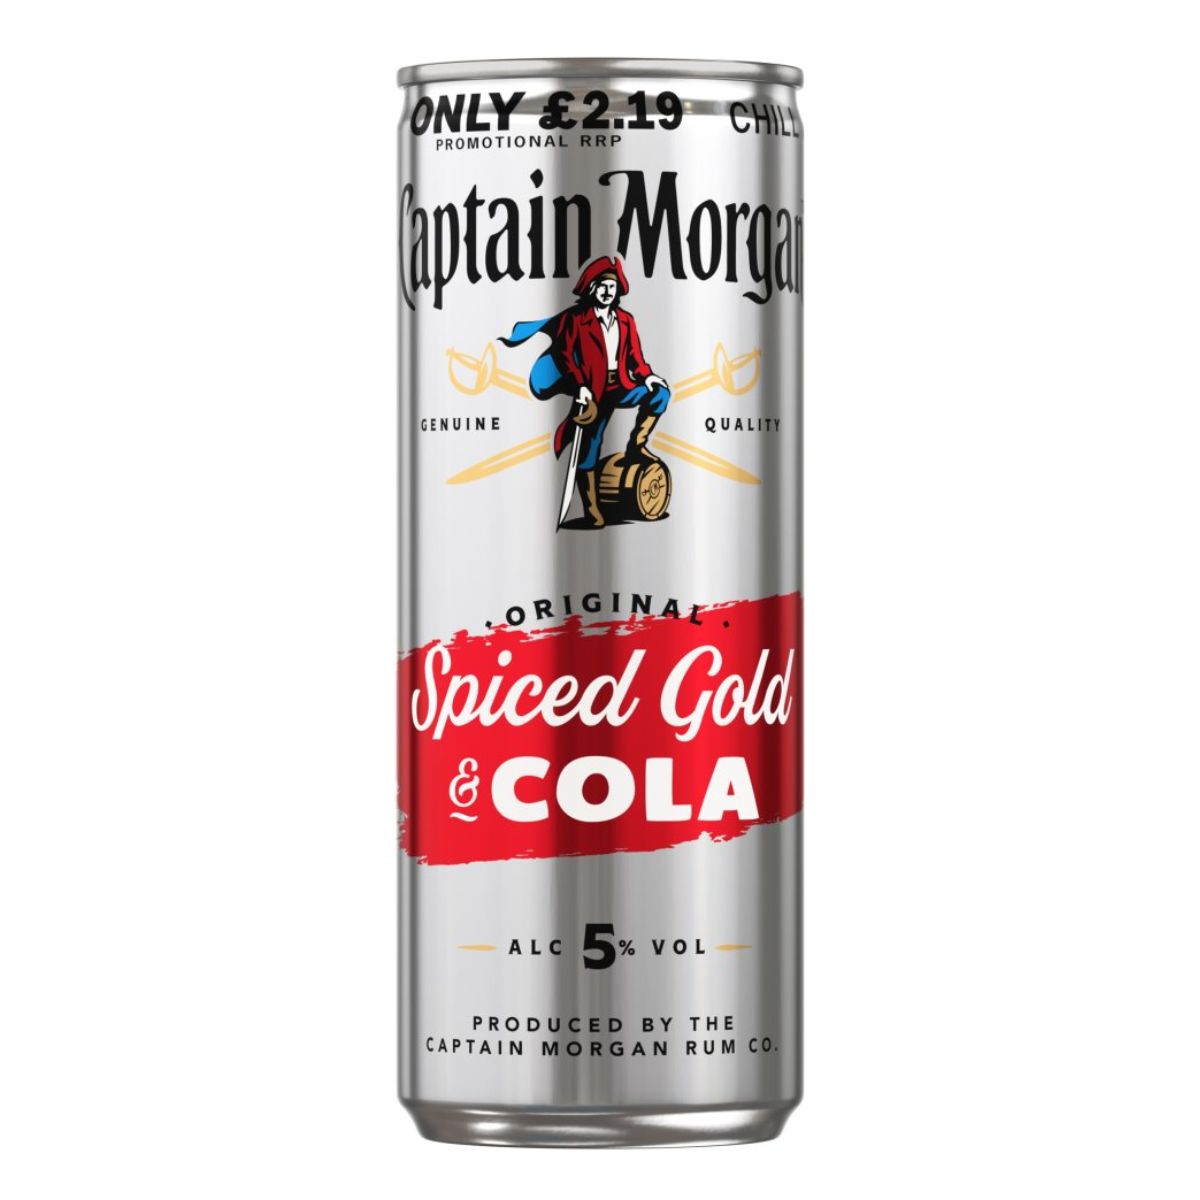 Captain Morgan - Original Spiced Gold & Cola Ready to Drink Premix Can (5.0% ABV) - 250ml and cola.